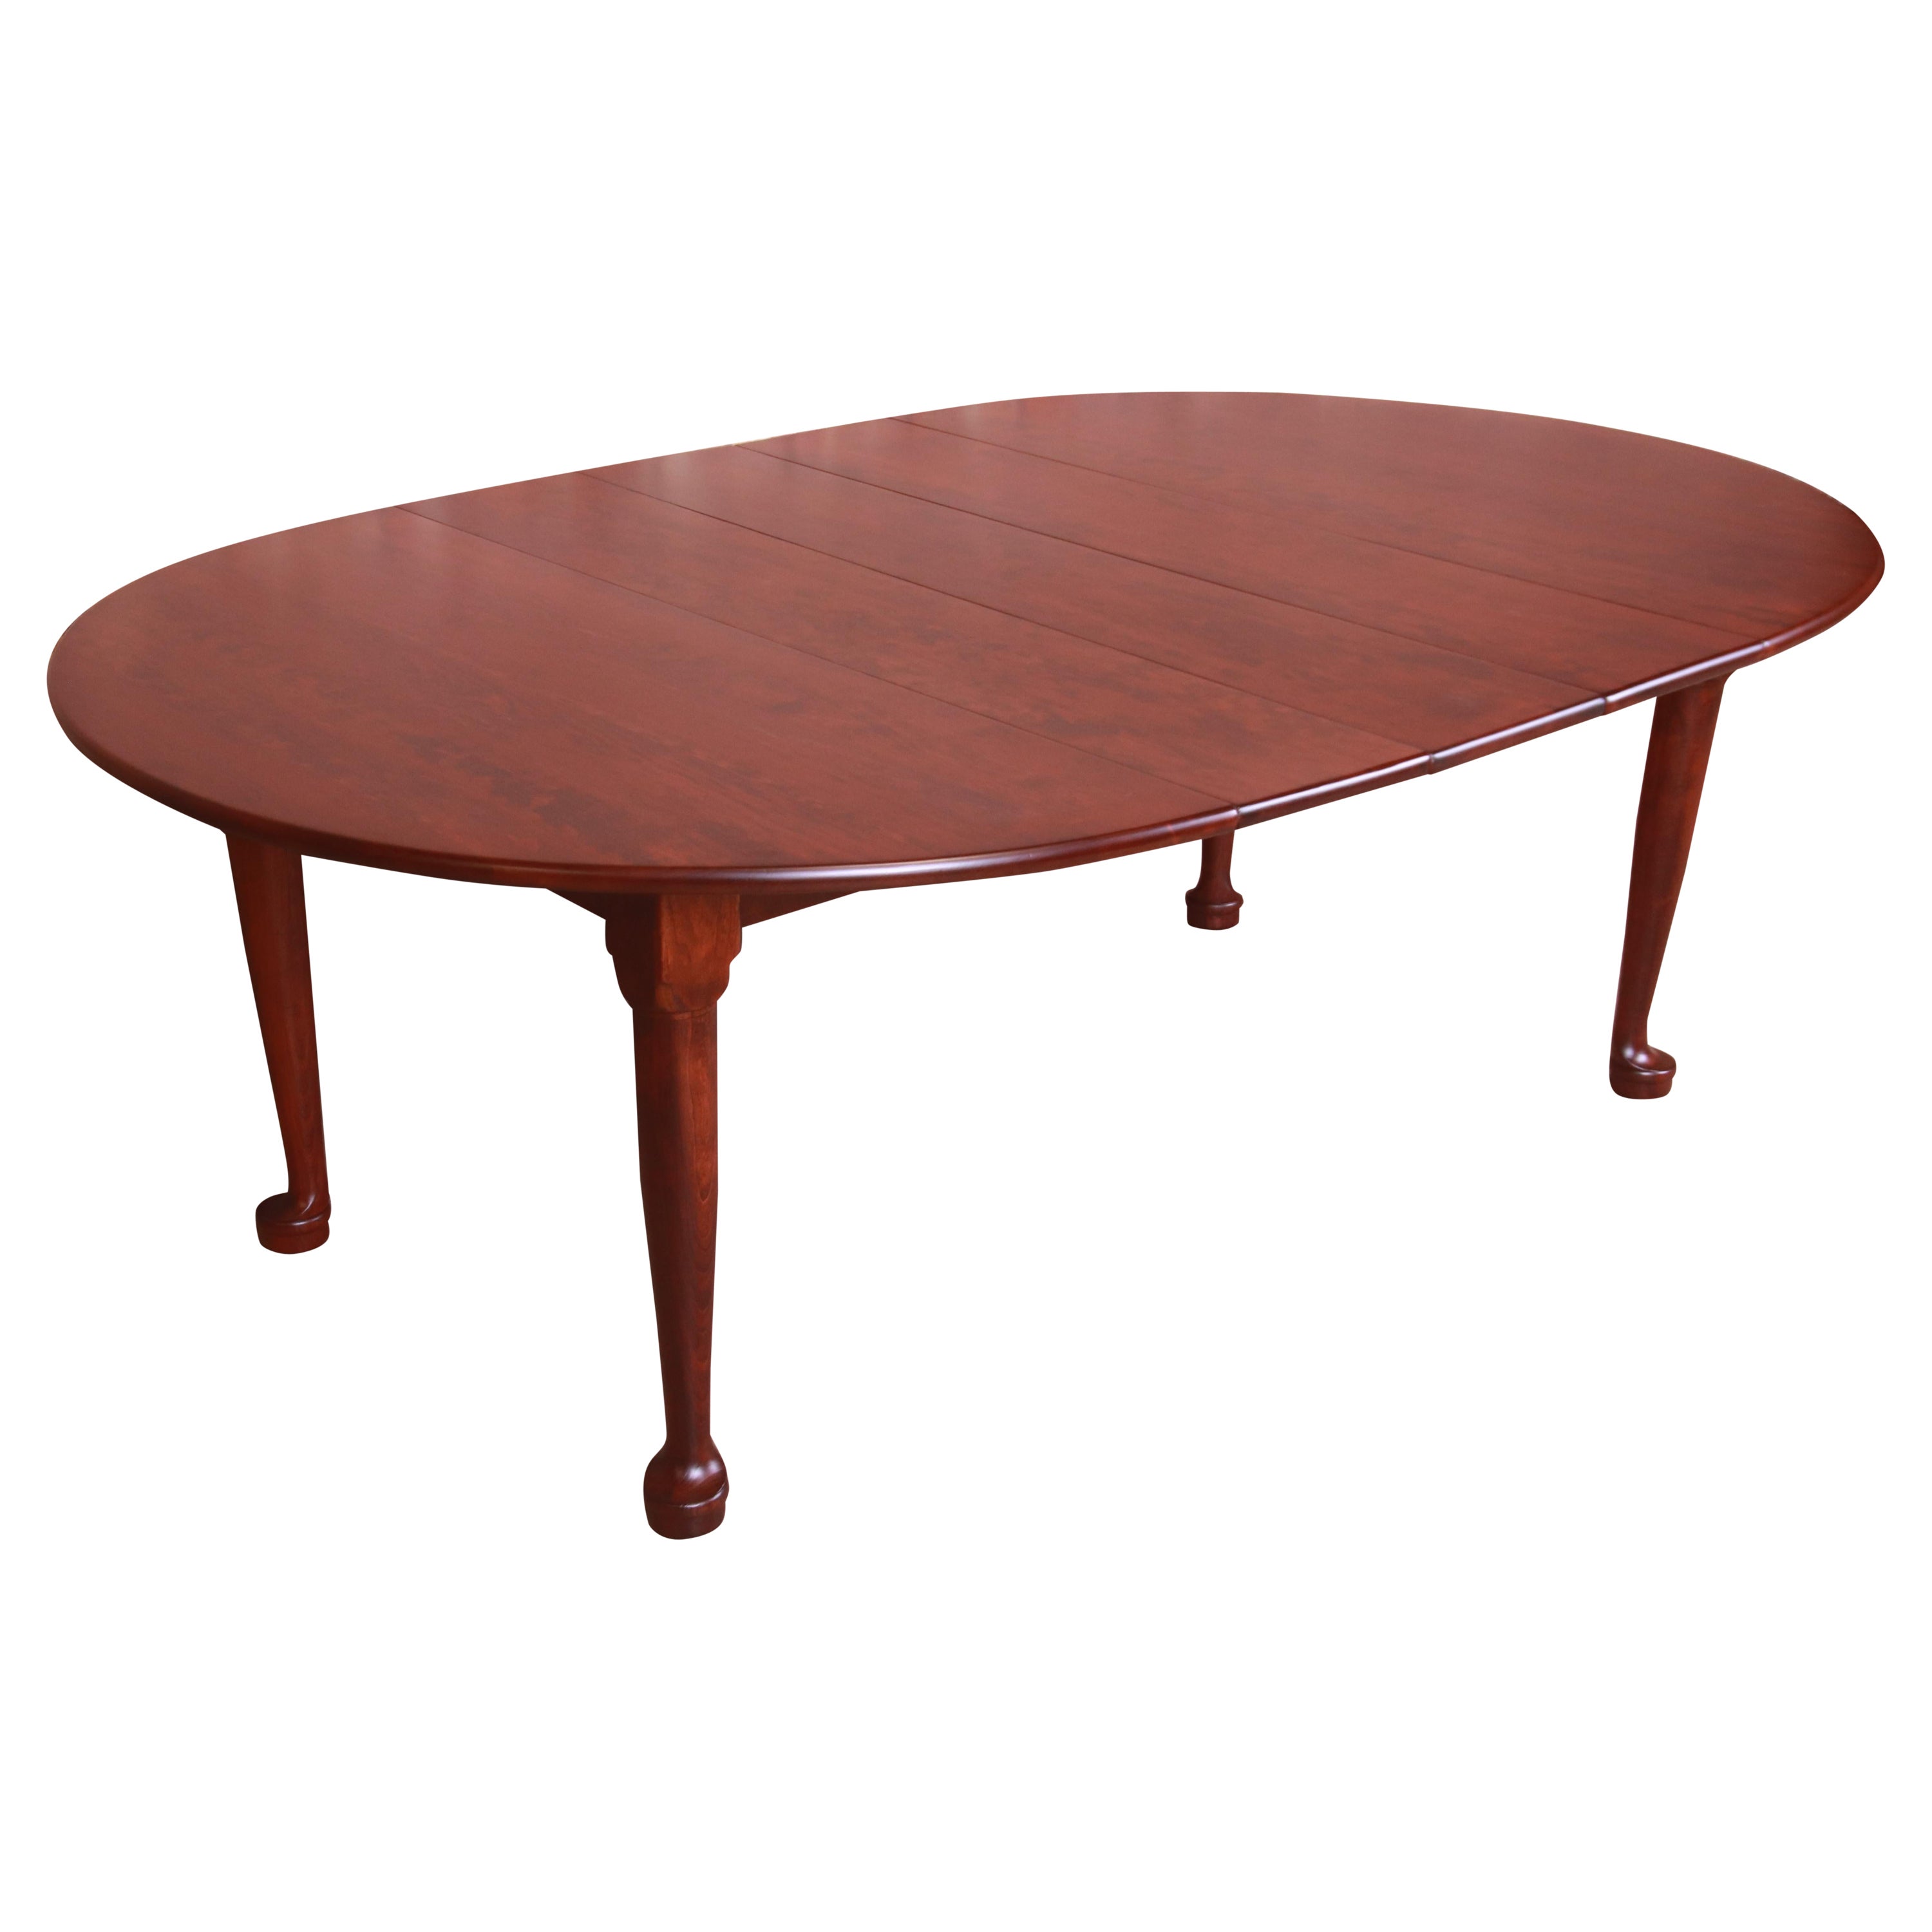 Stickley American Colonial Solid Cherry Wood Dining Table, Newly Refinished For Sale